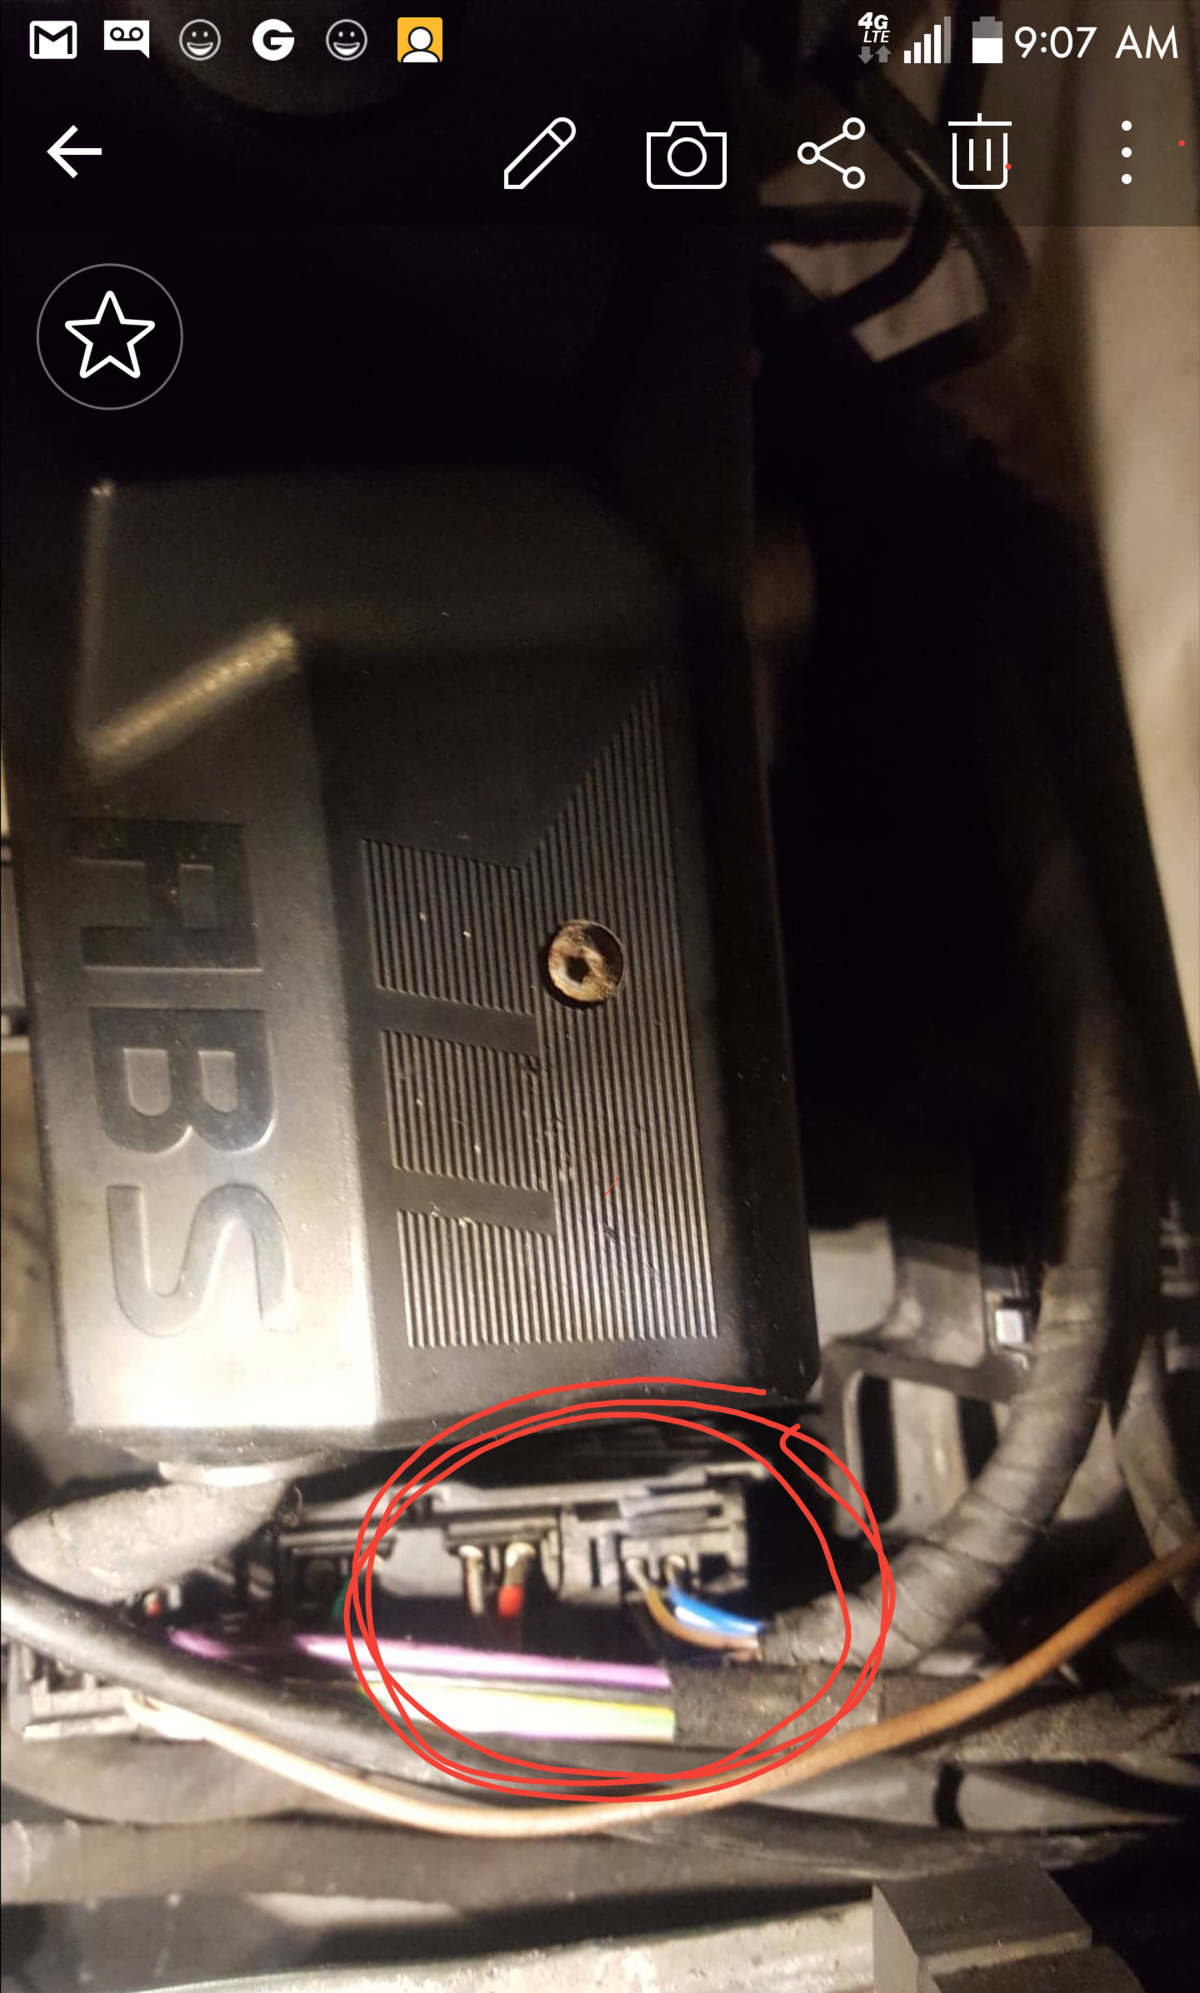 1994 C280 Engine wiring harness question - MBWorld.org Forums